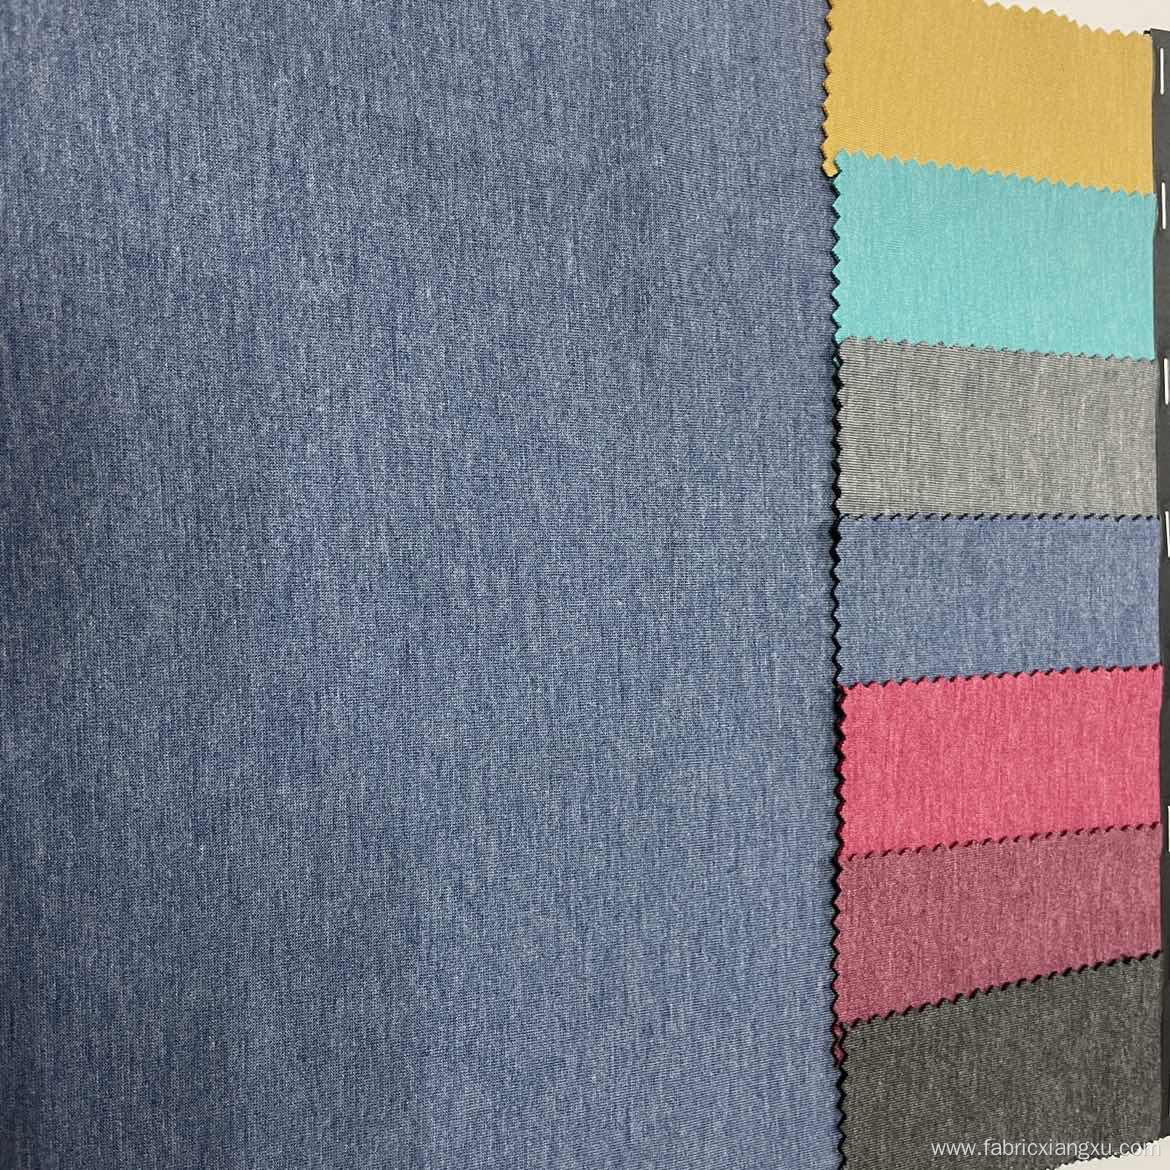 plain jersey knit cloth material fabric for clothing